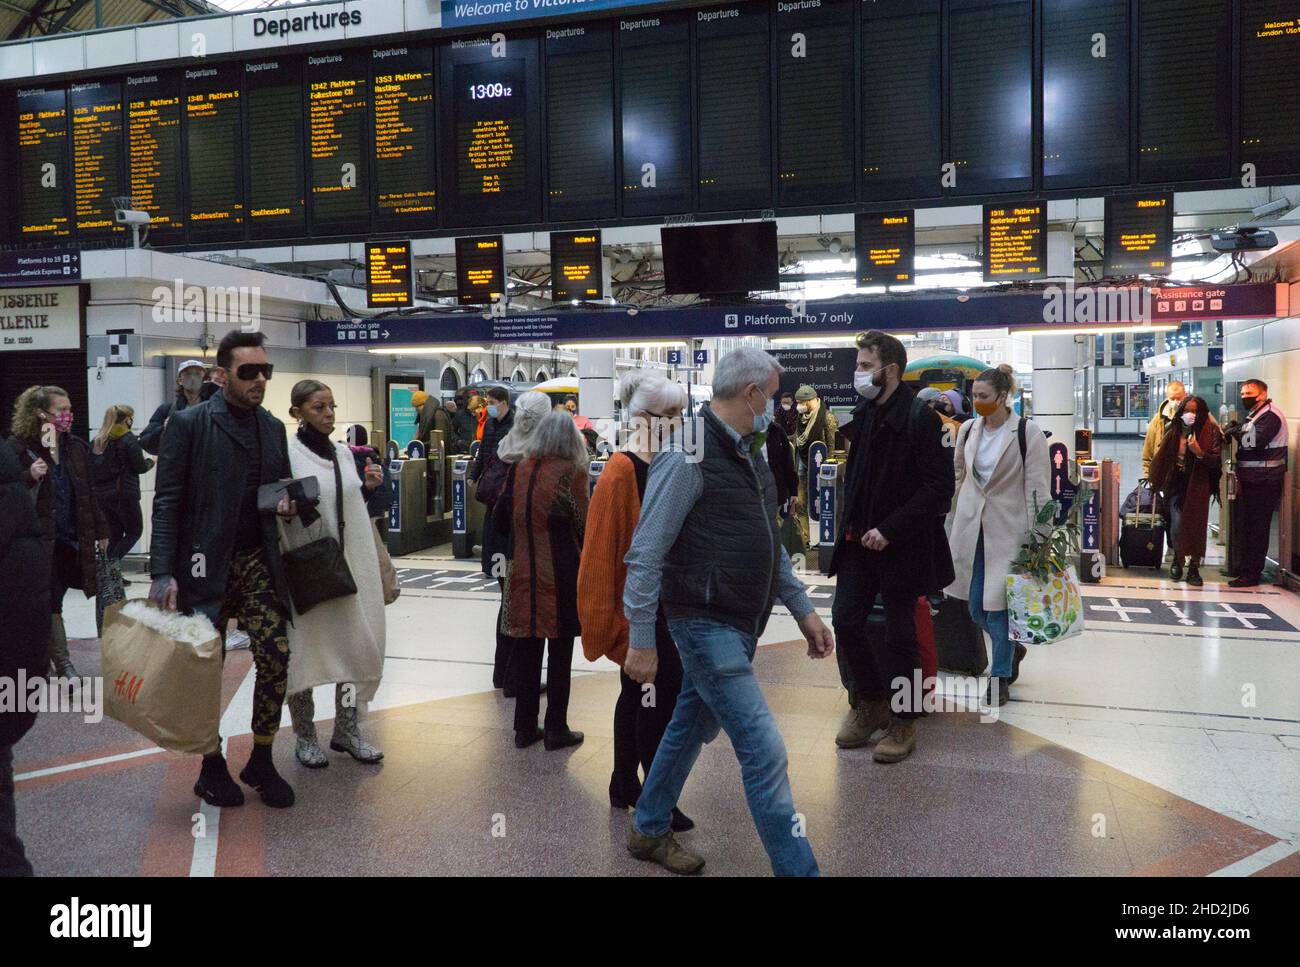 London, UK, 2 January 2022: Passengers arriving into Victoria Station are among the lucky ones who haven't had their trains cancelled due to staff shortages caused by the rapid spread of the omicron variant of coronavirus. Anna Watson/Alamy Live News Stock Photo